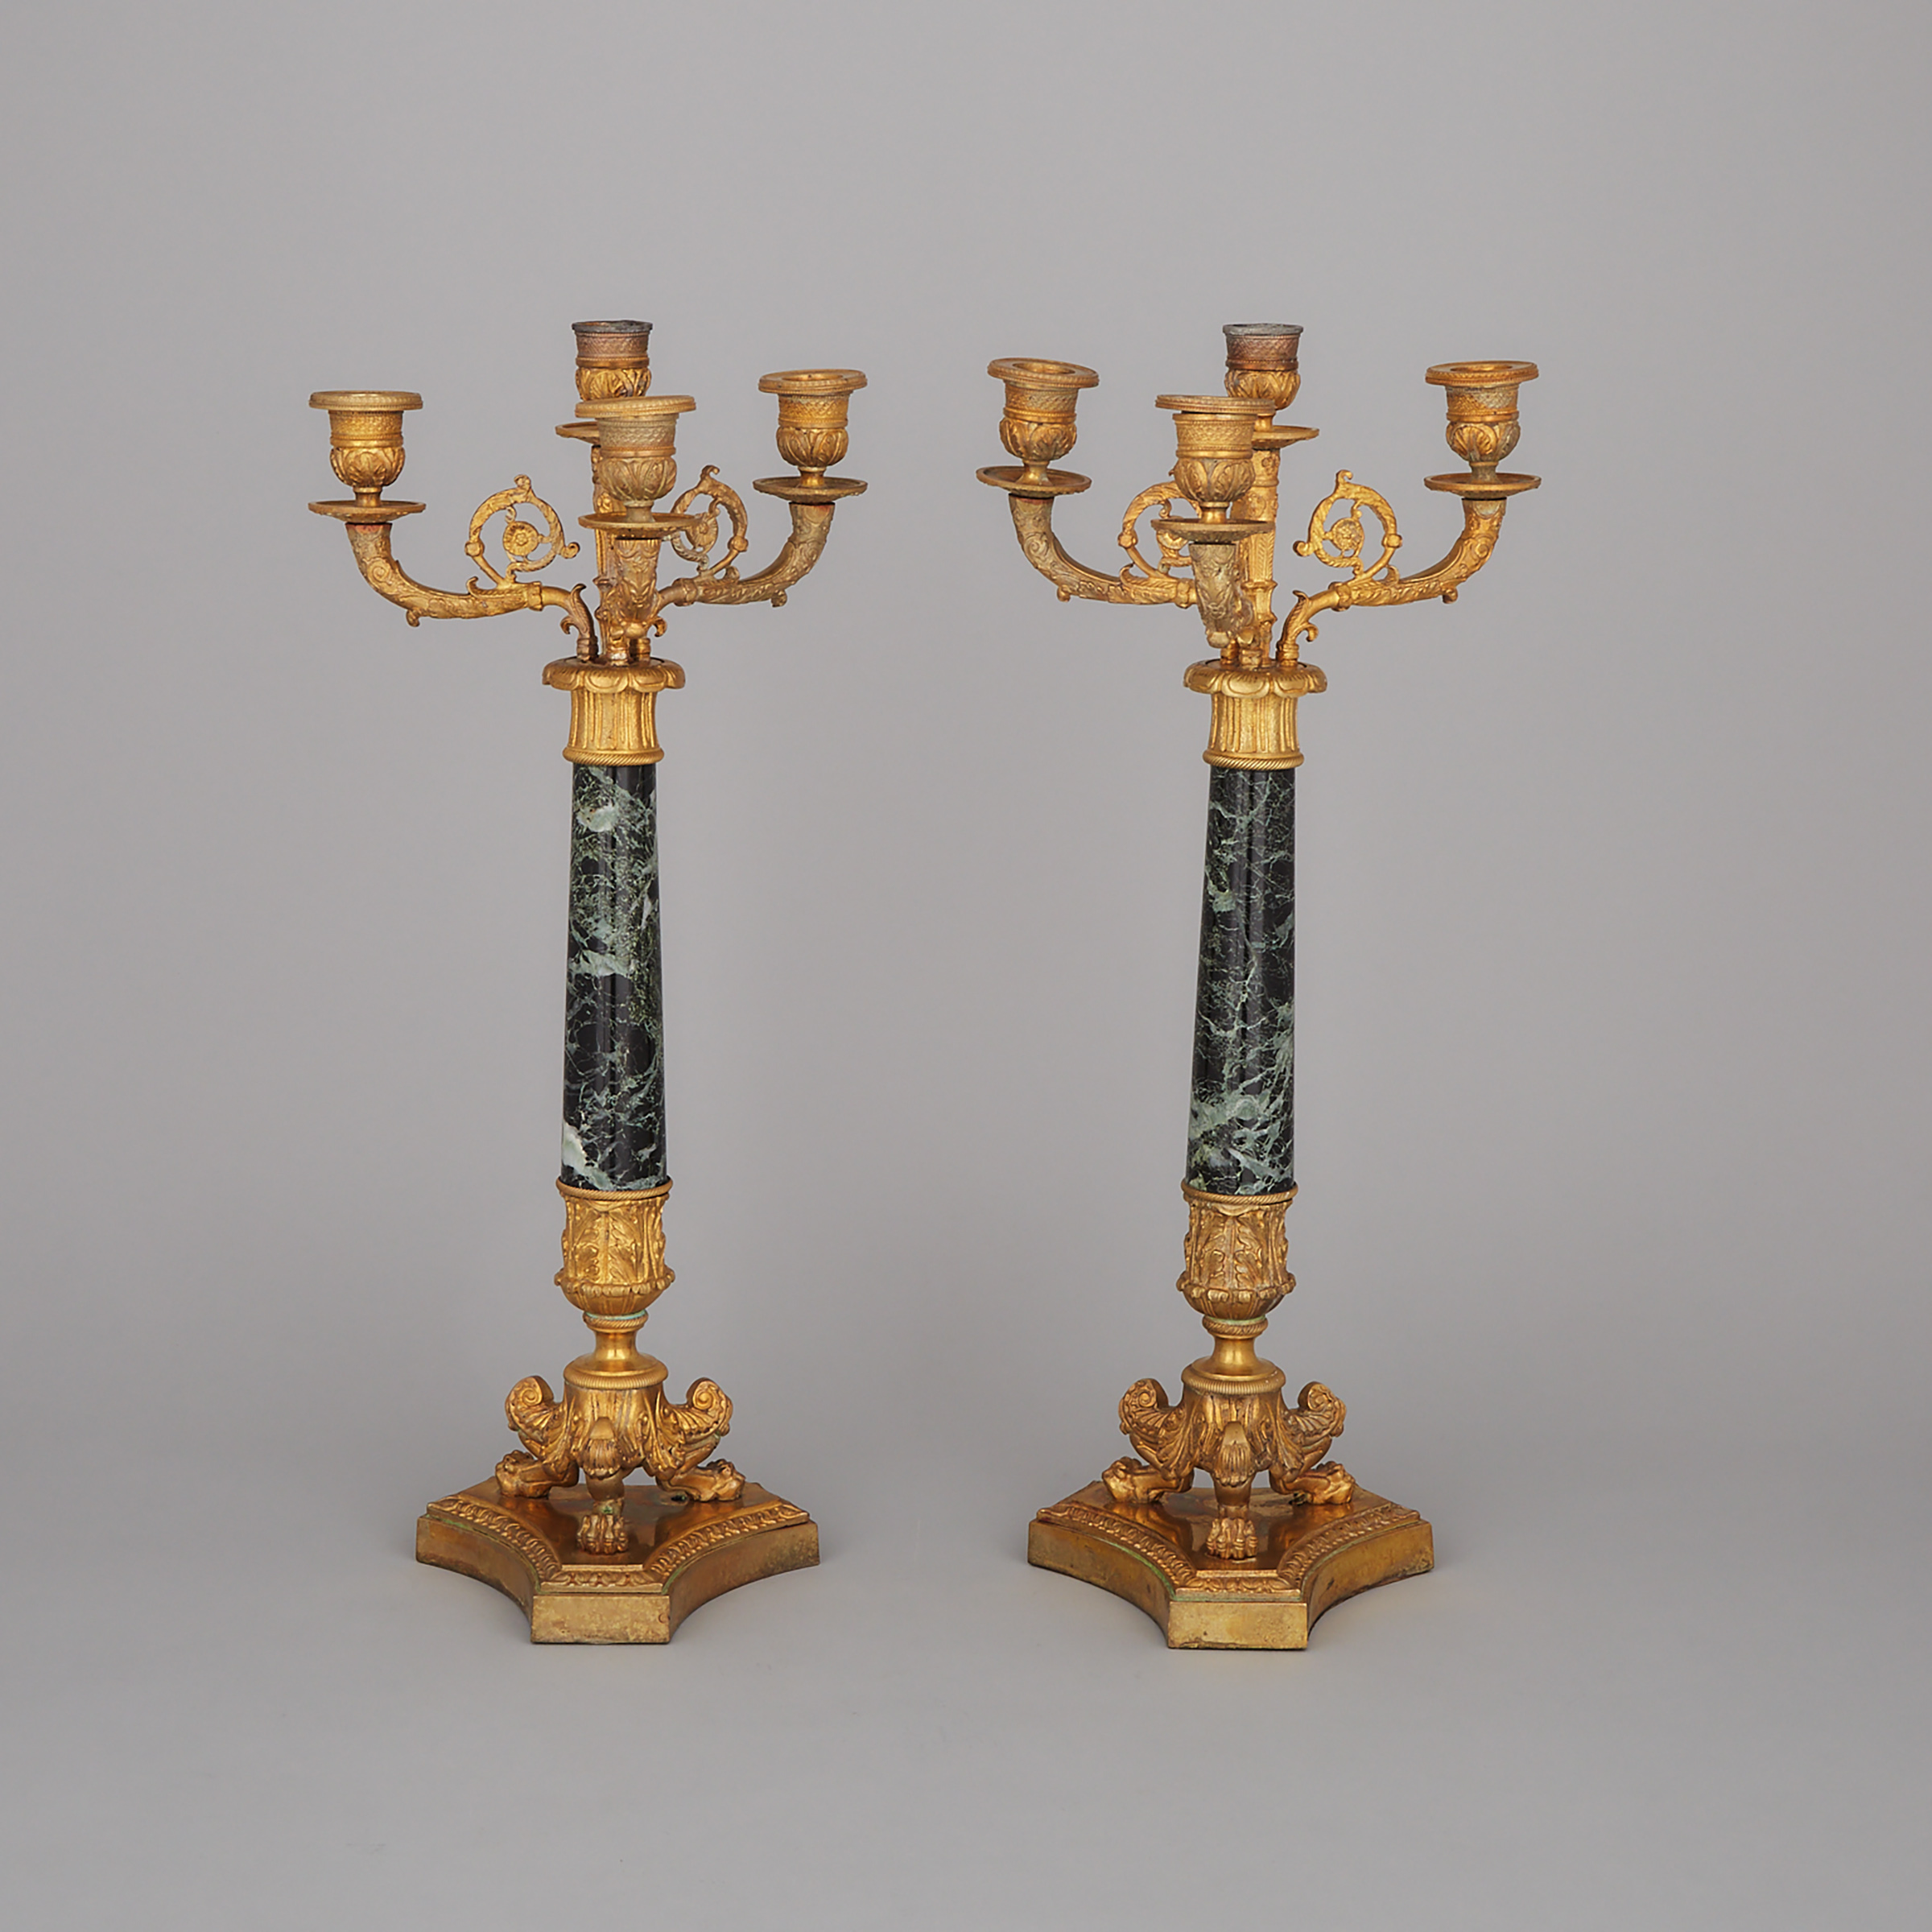 Pair of French Empire Gilt Bronze and Verde Antique Marble Candelabra, 19th century